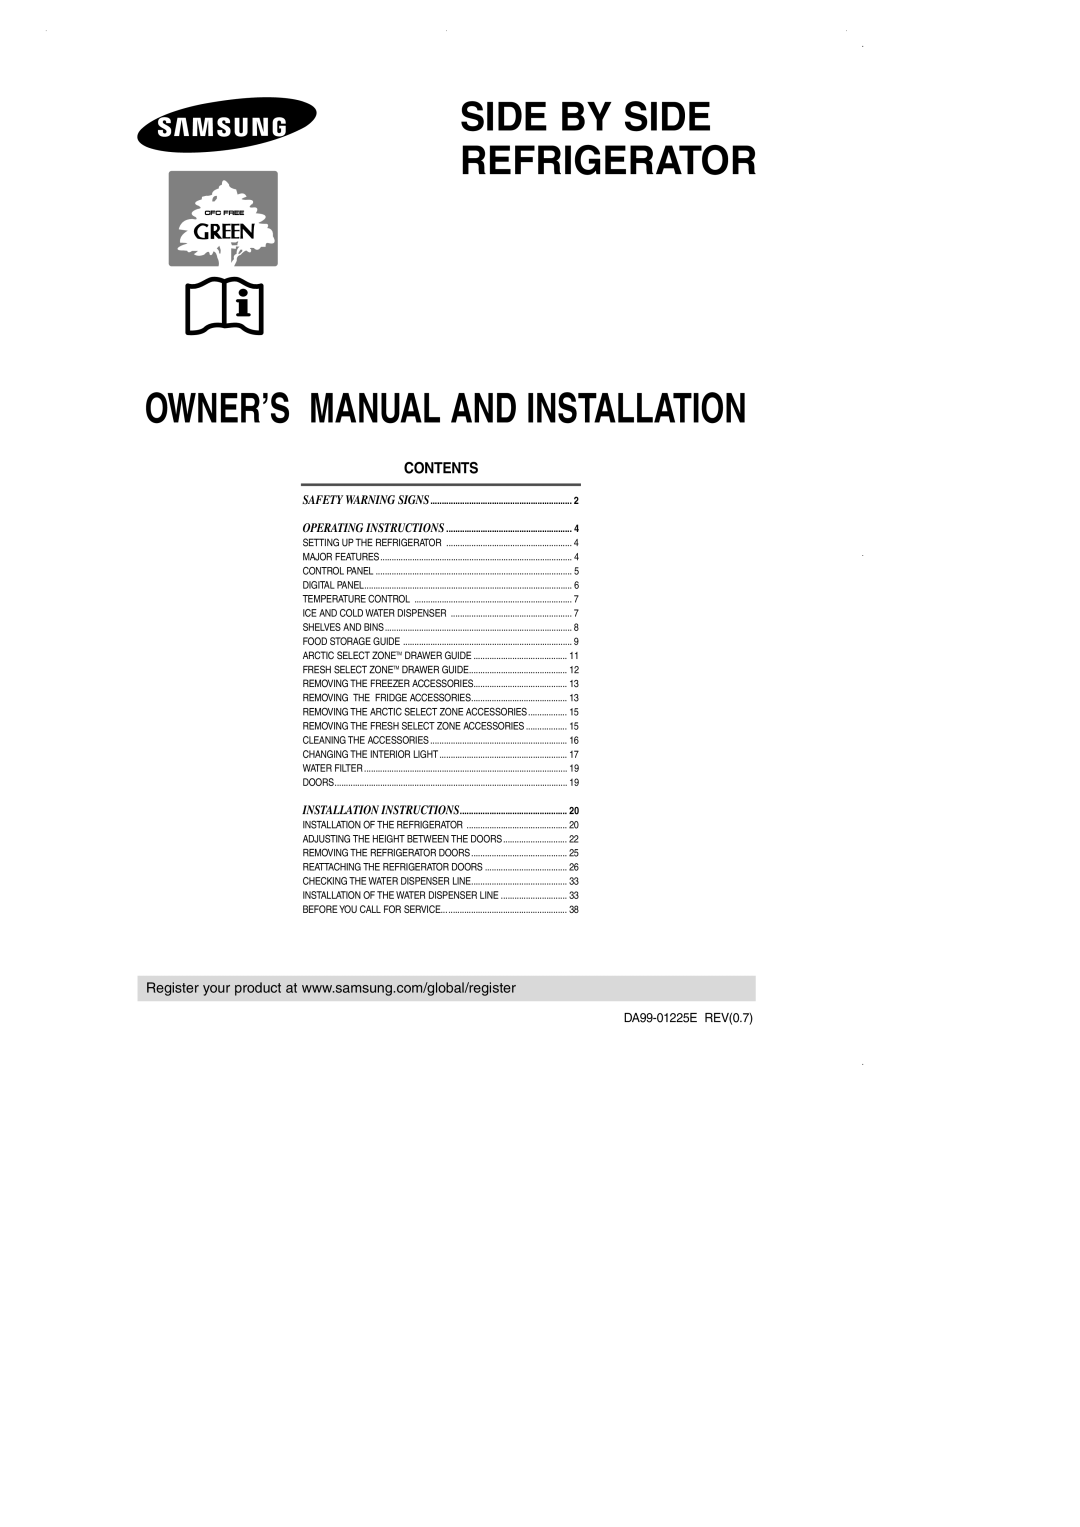 Samsung DA99-01225E owner manual Contents, Side By Side Refrigerator, Safety Warning Signs, Operating Instructions 